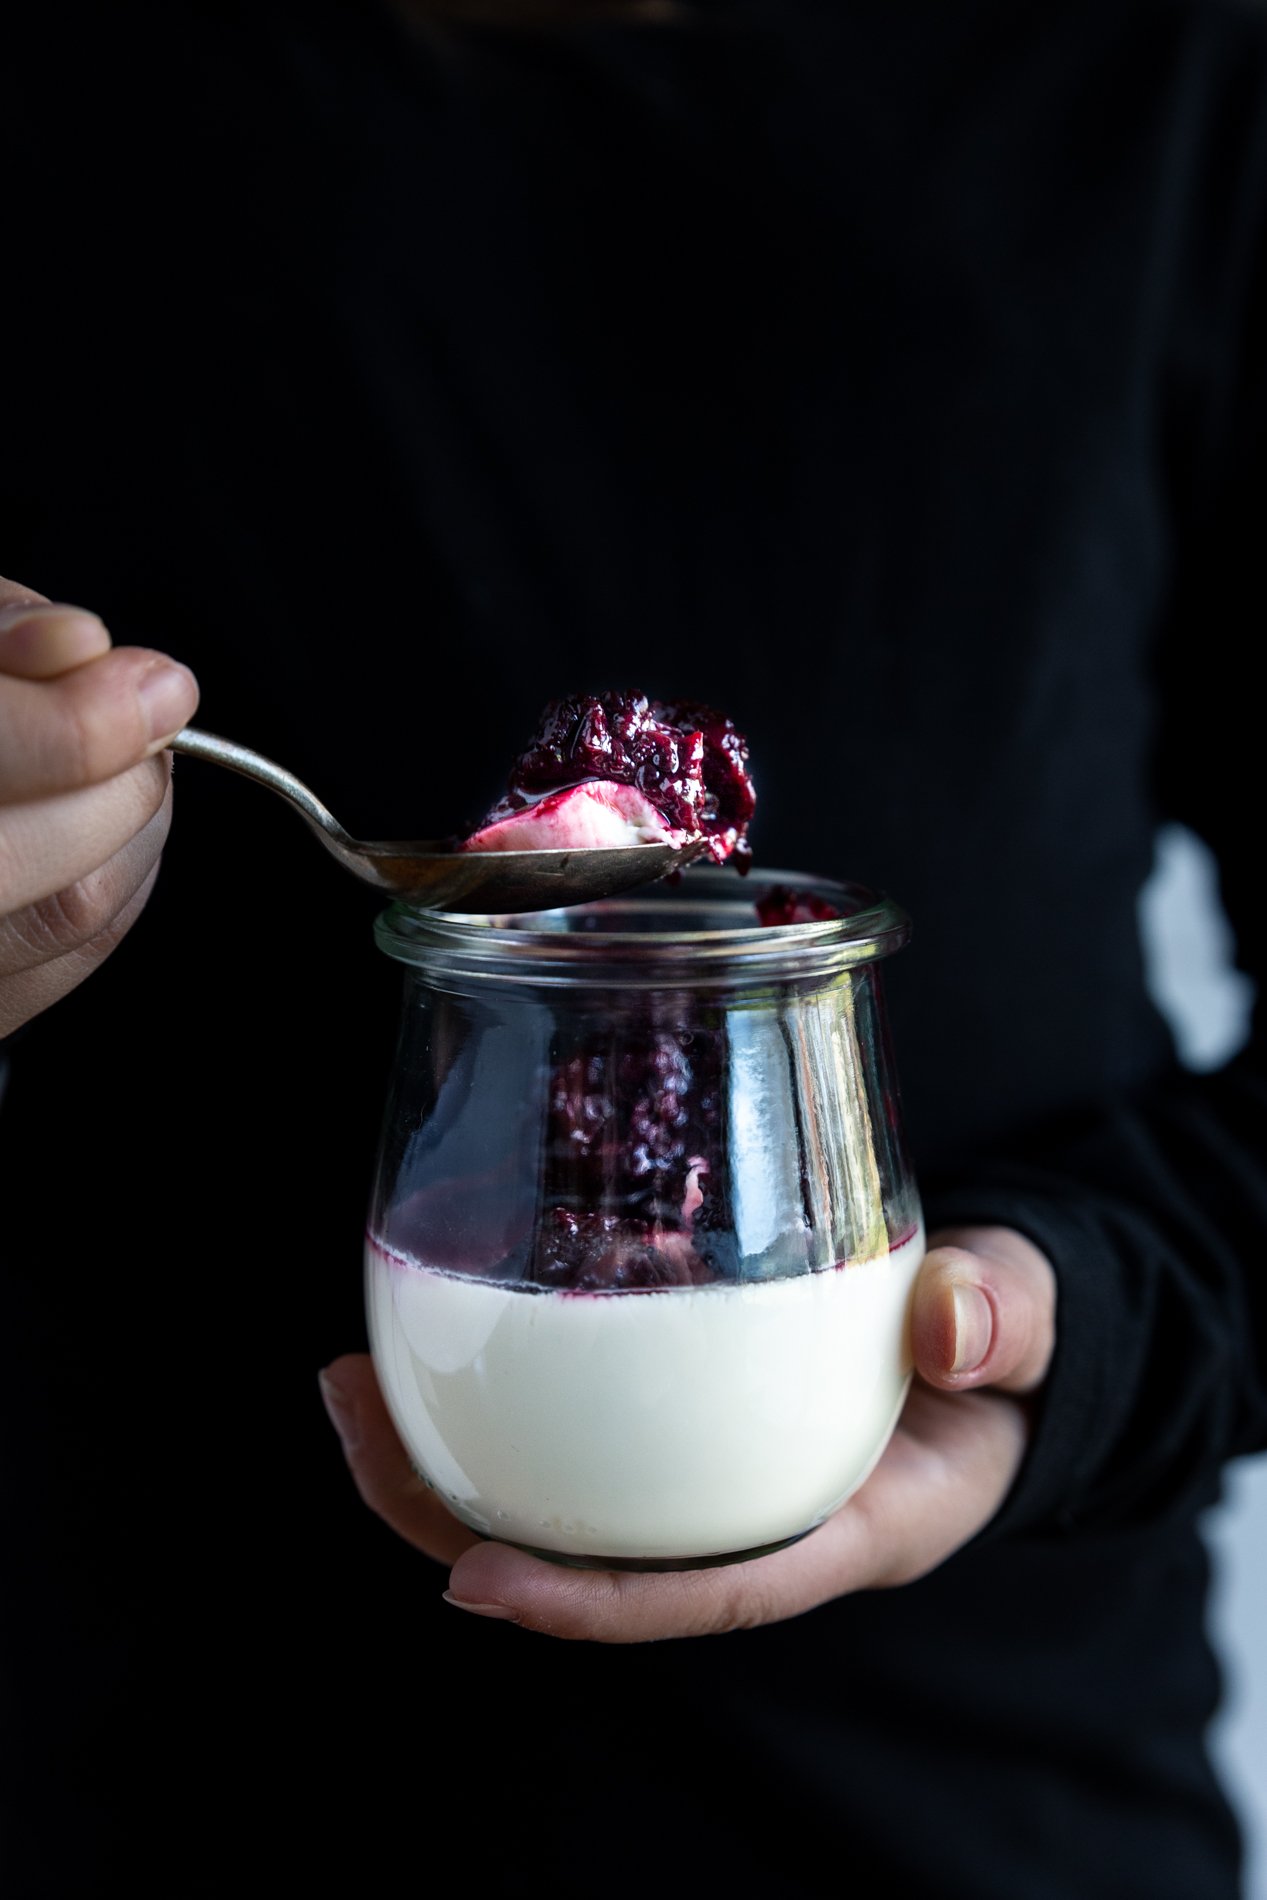 Straight ahead view of a person holding a jar of vanilla bean panna cotta with basil blackberry compote. In right hand is a spoon with a scoop of the dessert, person is wearing a black shirt.